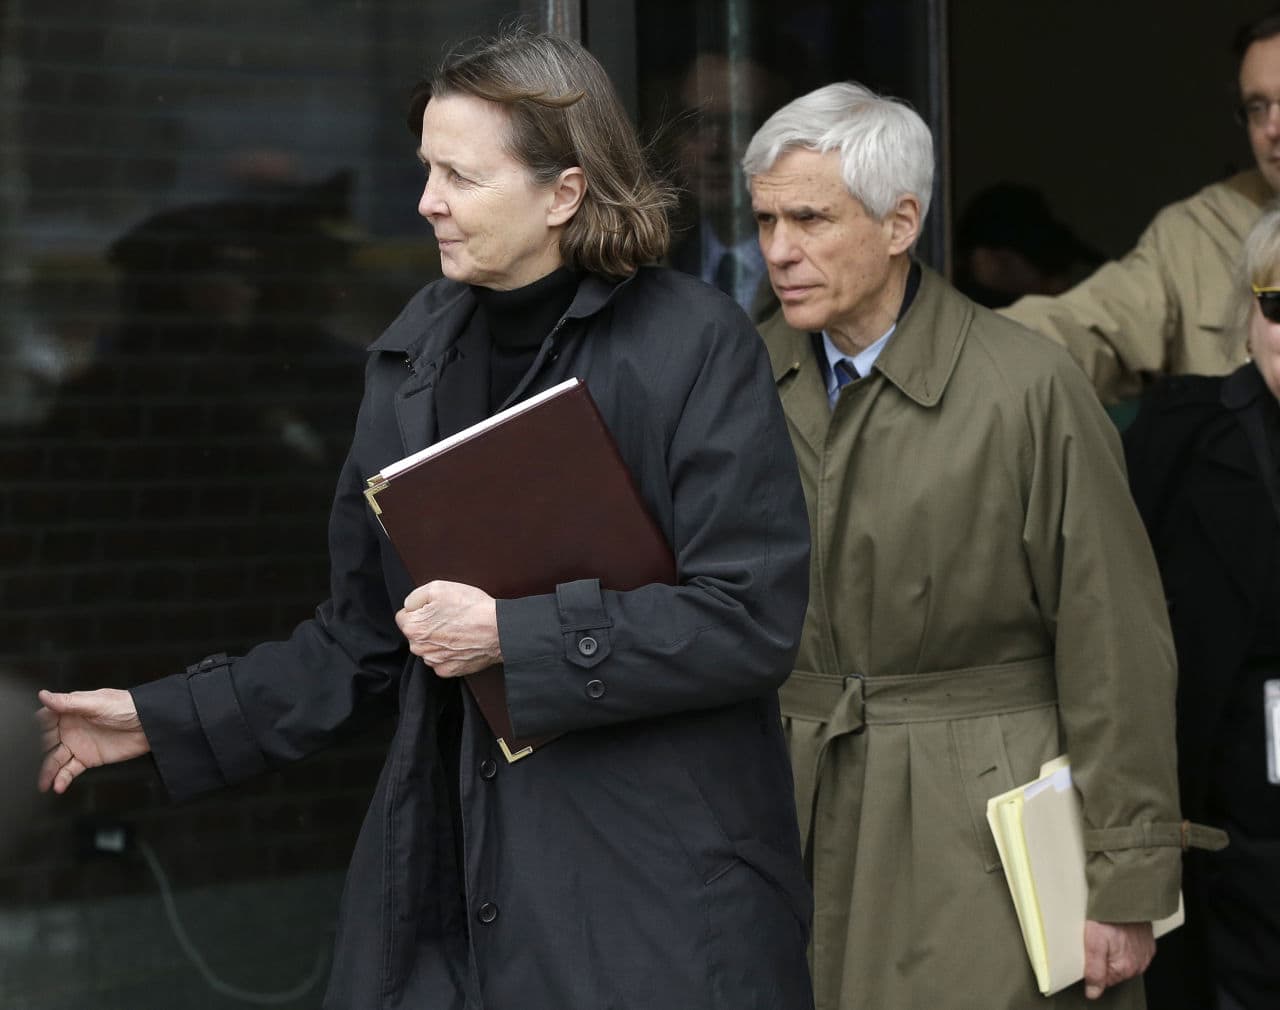 Defense attorneys Judy Clarke, left, and David Bruck leave federal court Wednesday following the verdict.  (Steven Senne/AP)